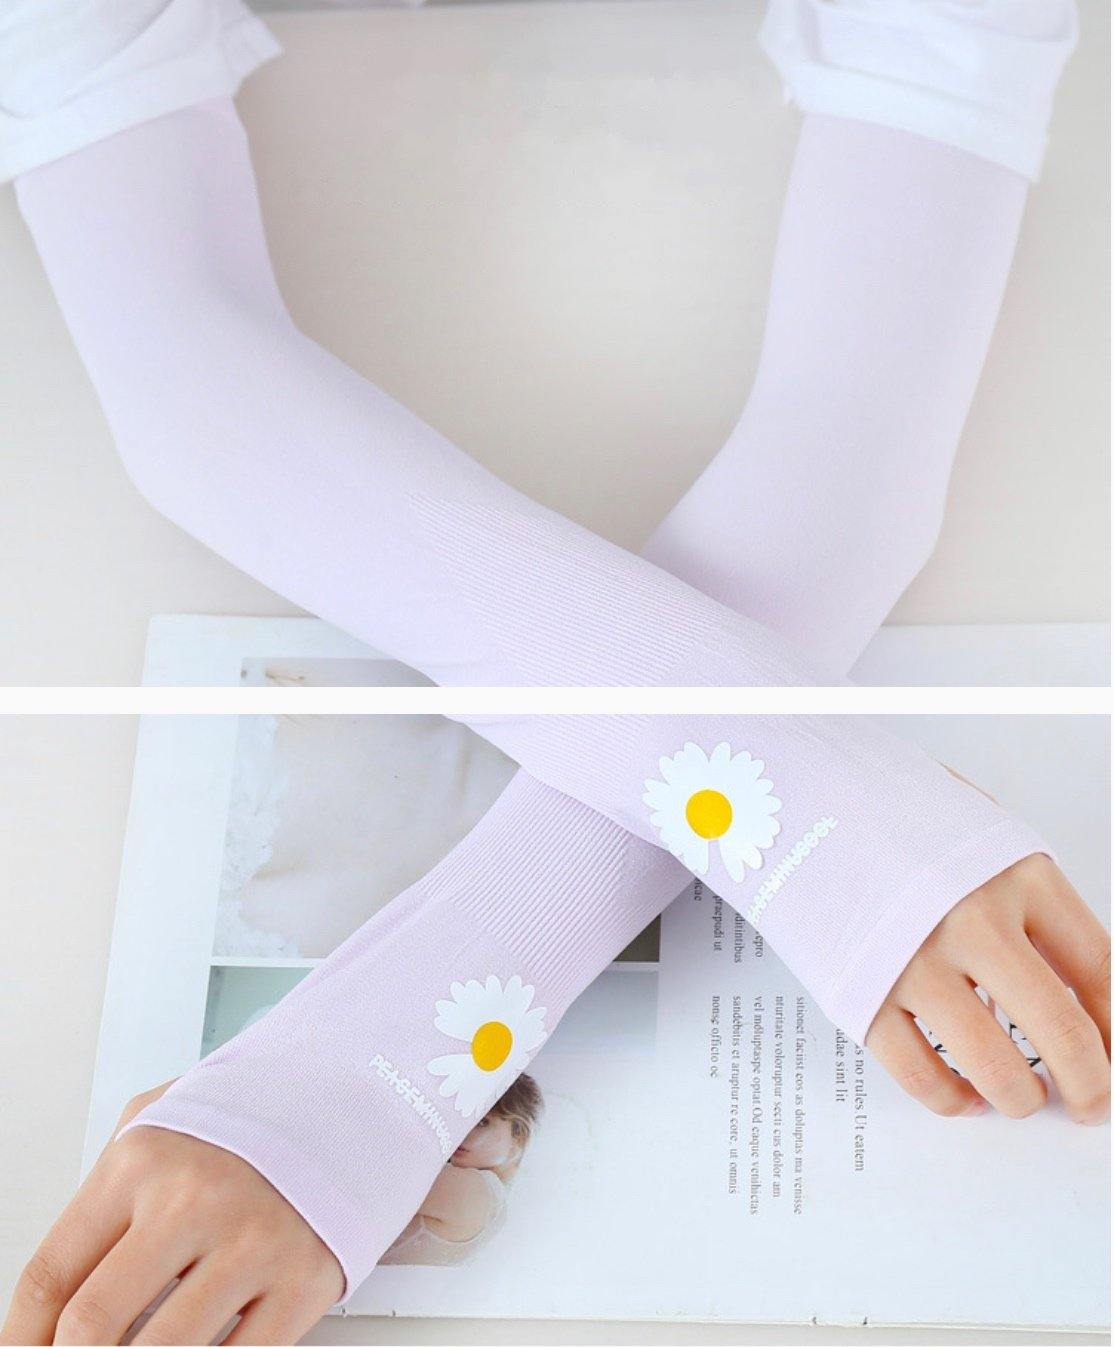 G&L AquaX-Fit UV Sleeves with Flower Design - Golf and Leisure